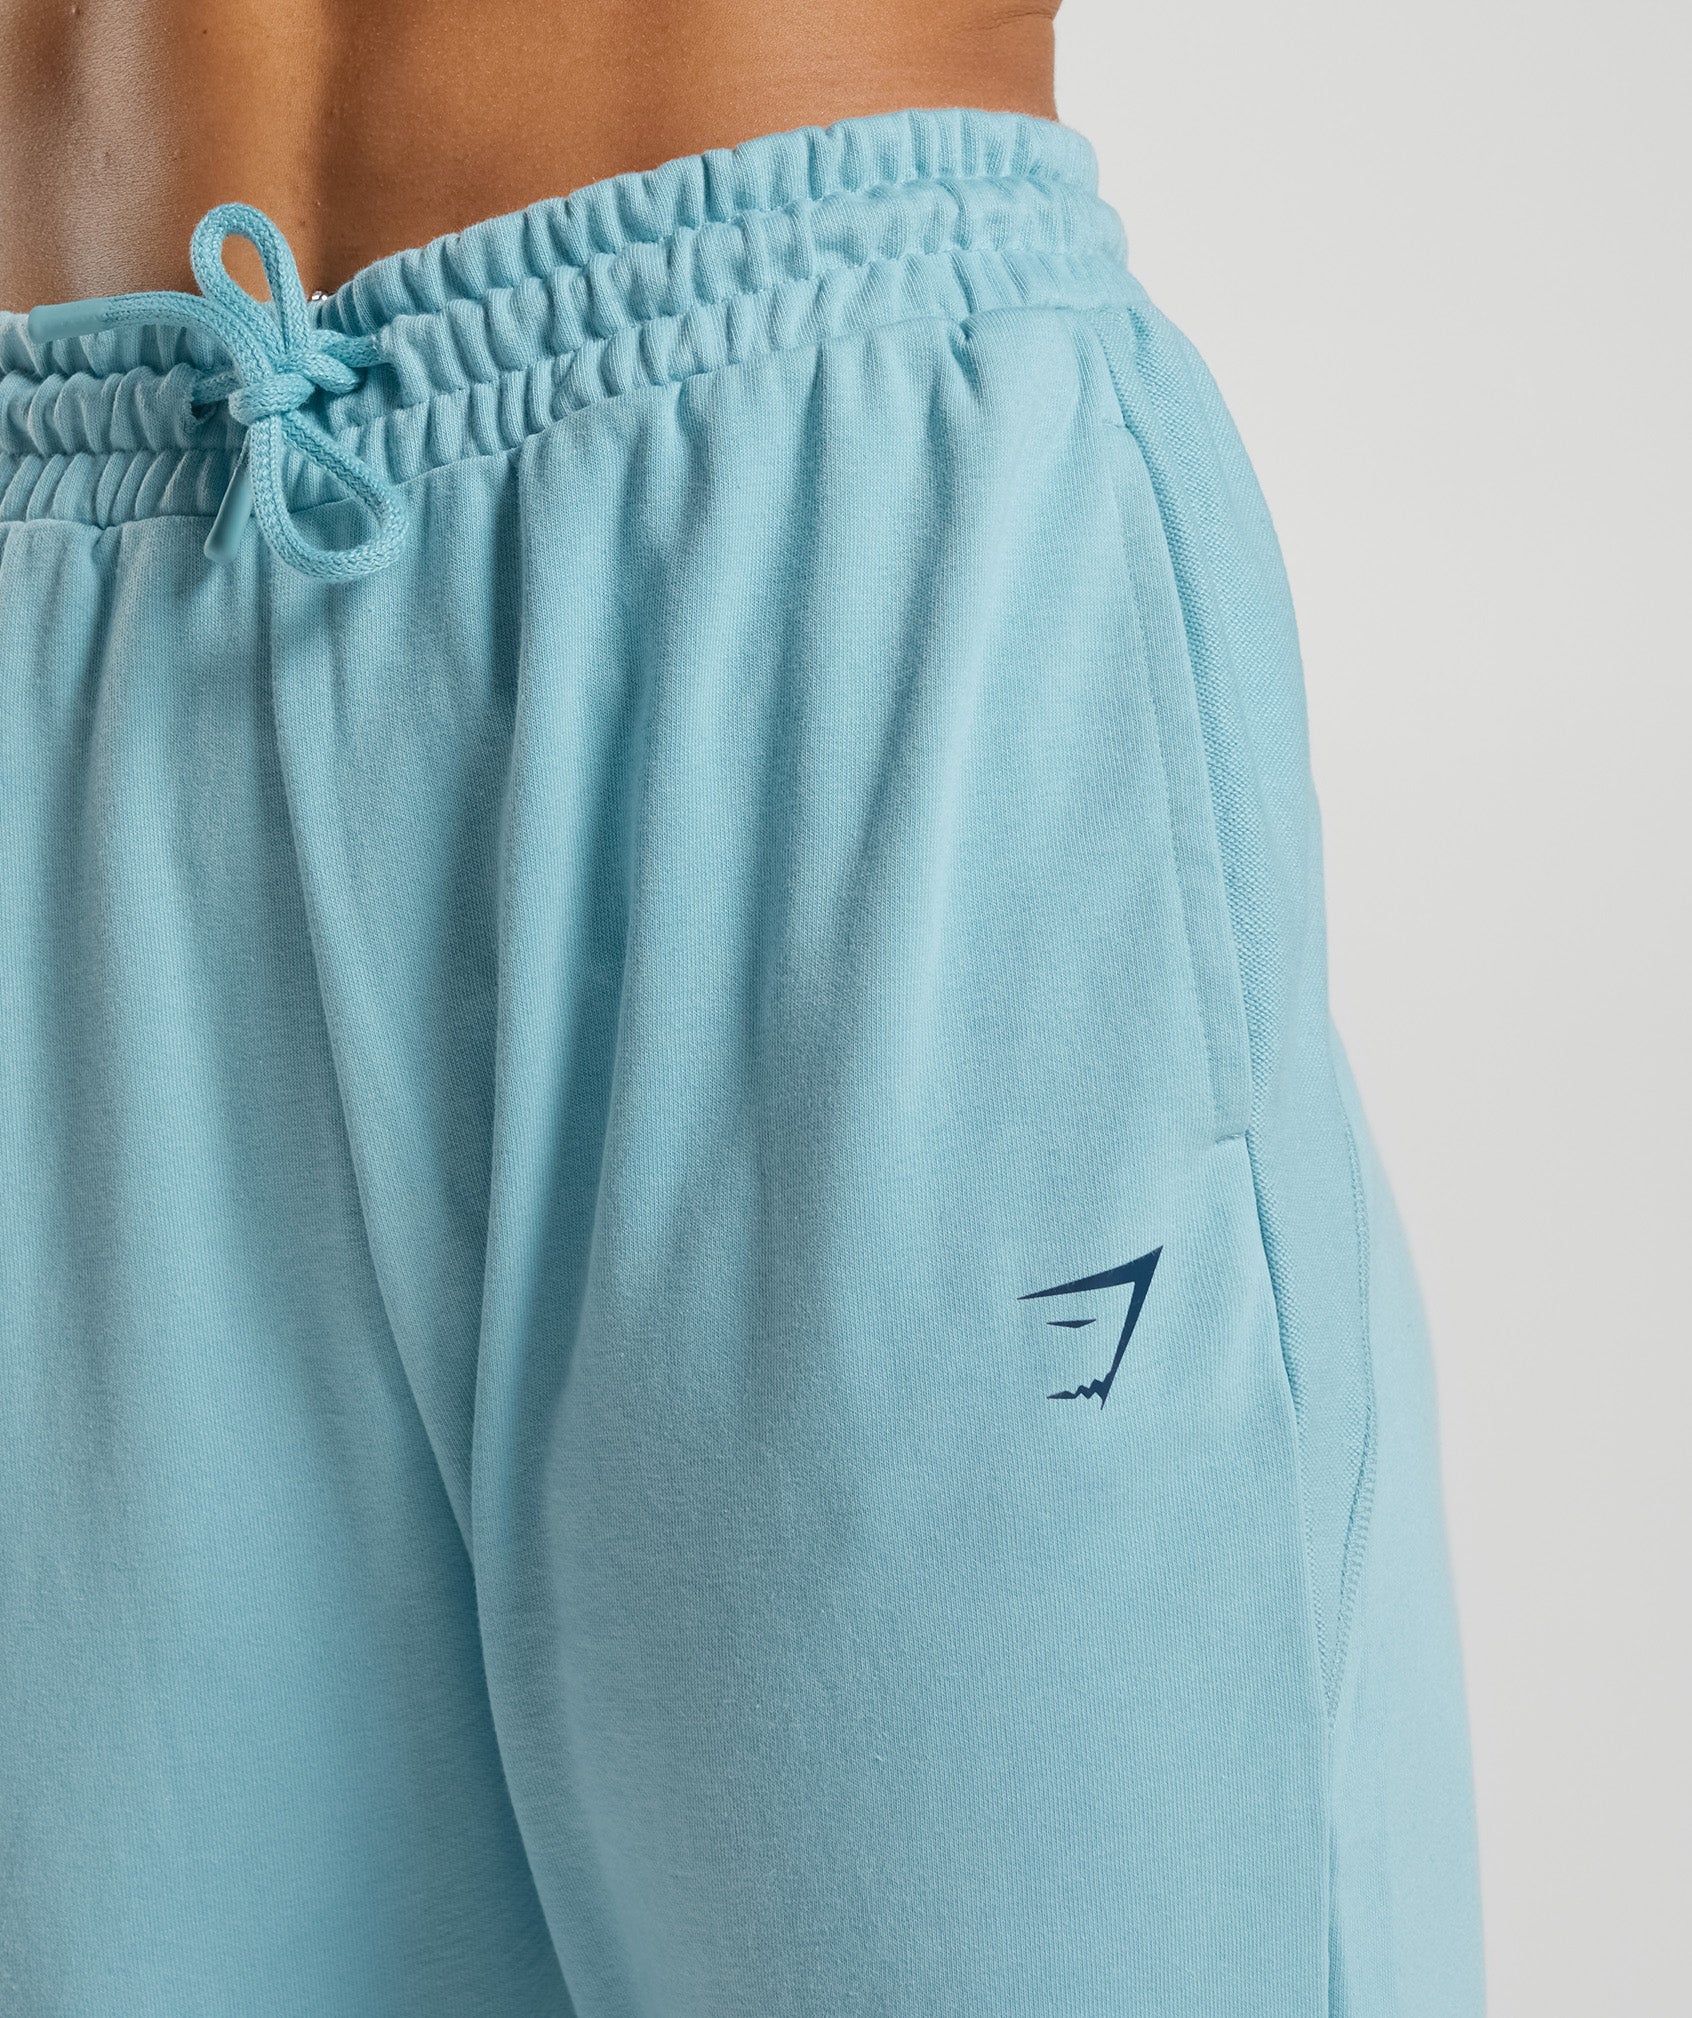 GS Power Joggers in Iceberg Blue - view 6